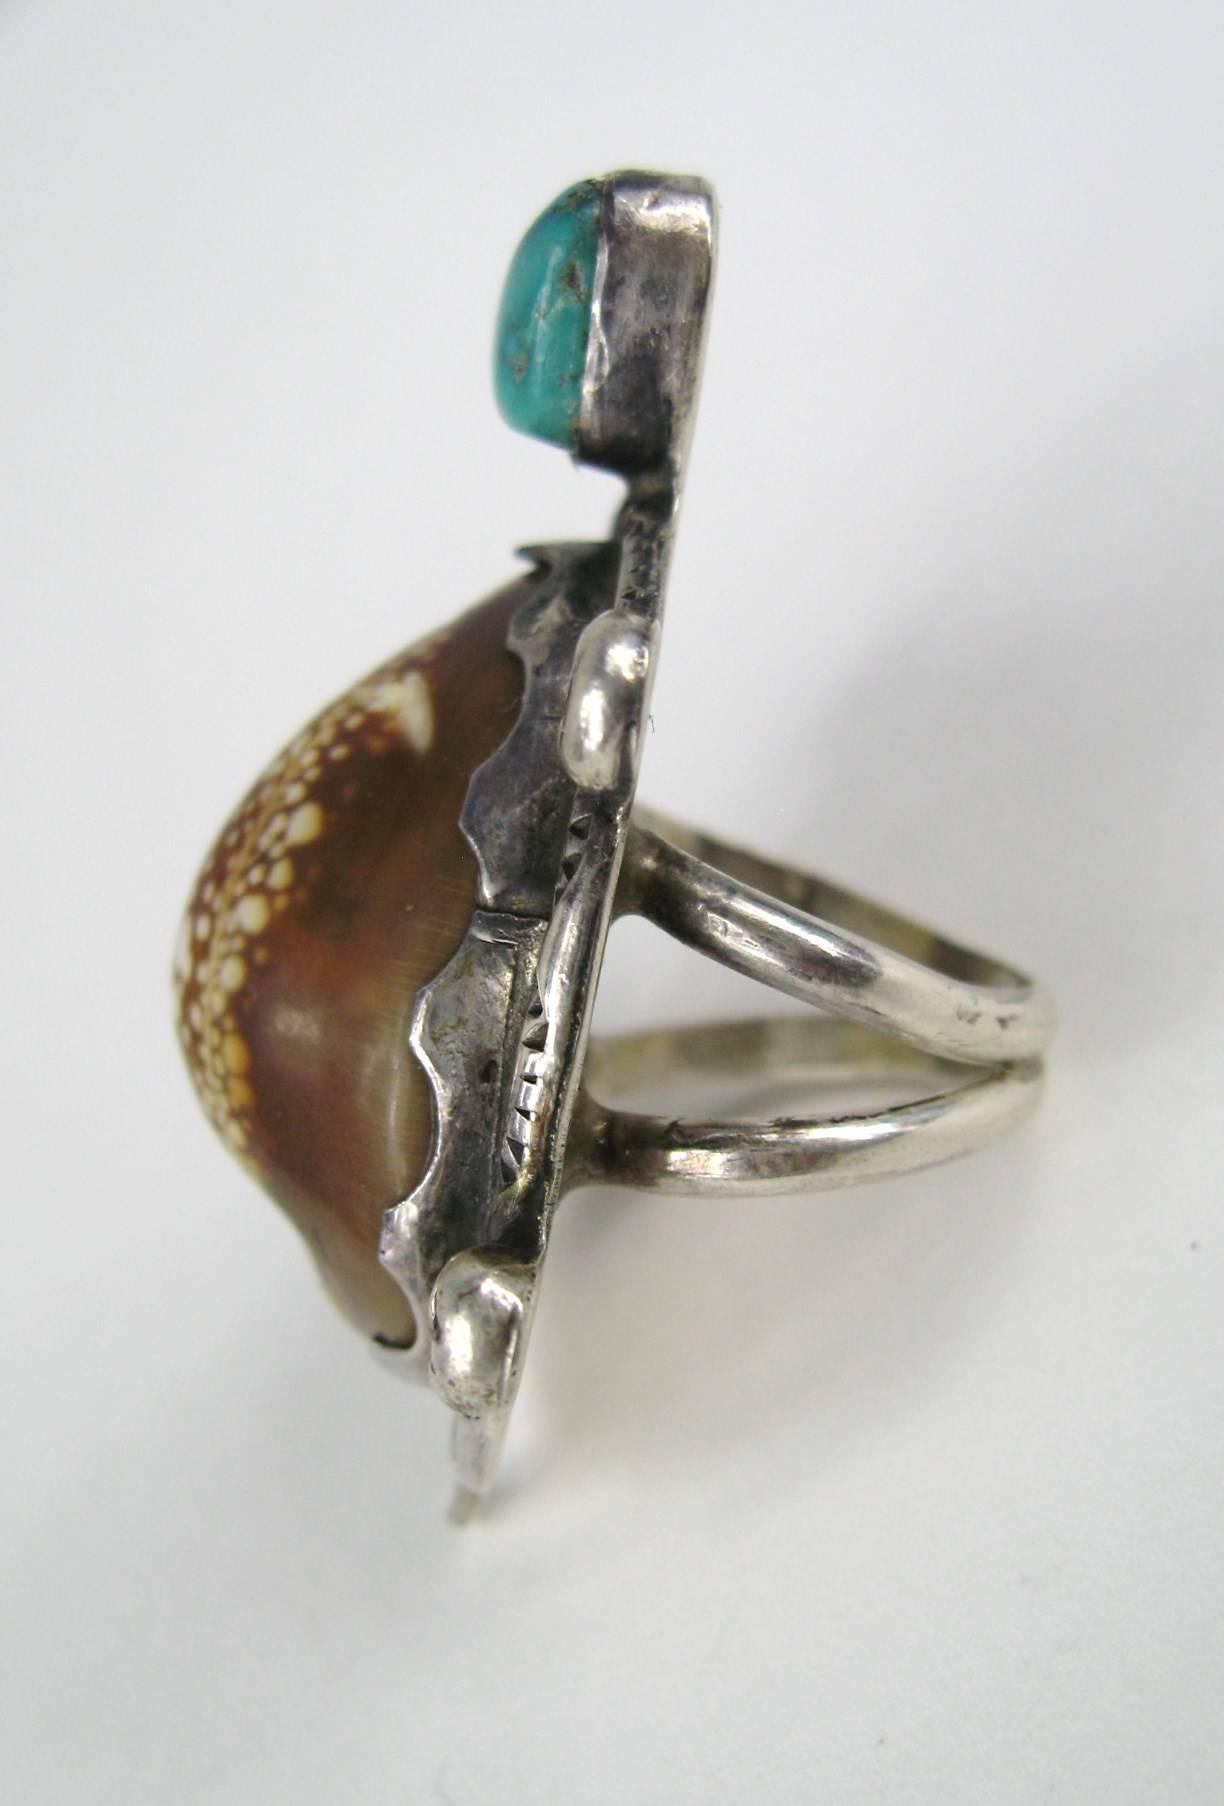 Another Fantastic piece from a E.A Zunie. The Matching Squash Blossom and Bracelet are available on our store front . Ring is a size 6. Measuring 1.90in x 1.30in. This is out of a massive collection of Hopi, Zuni, Navajo, Southwestern and sterling